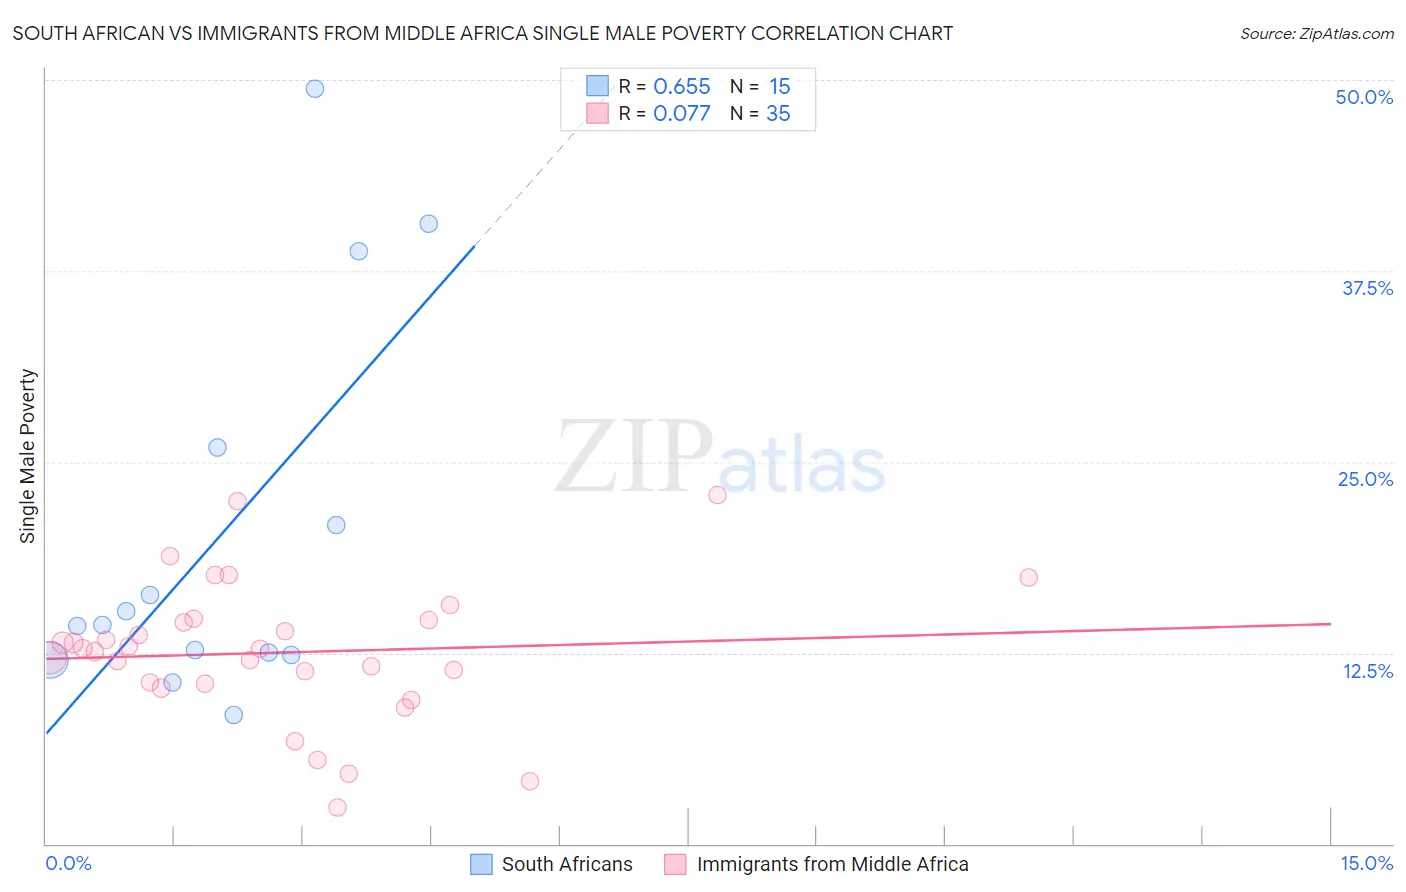 South African vs Immigrants from Middle Africa Single Male Poverty